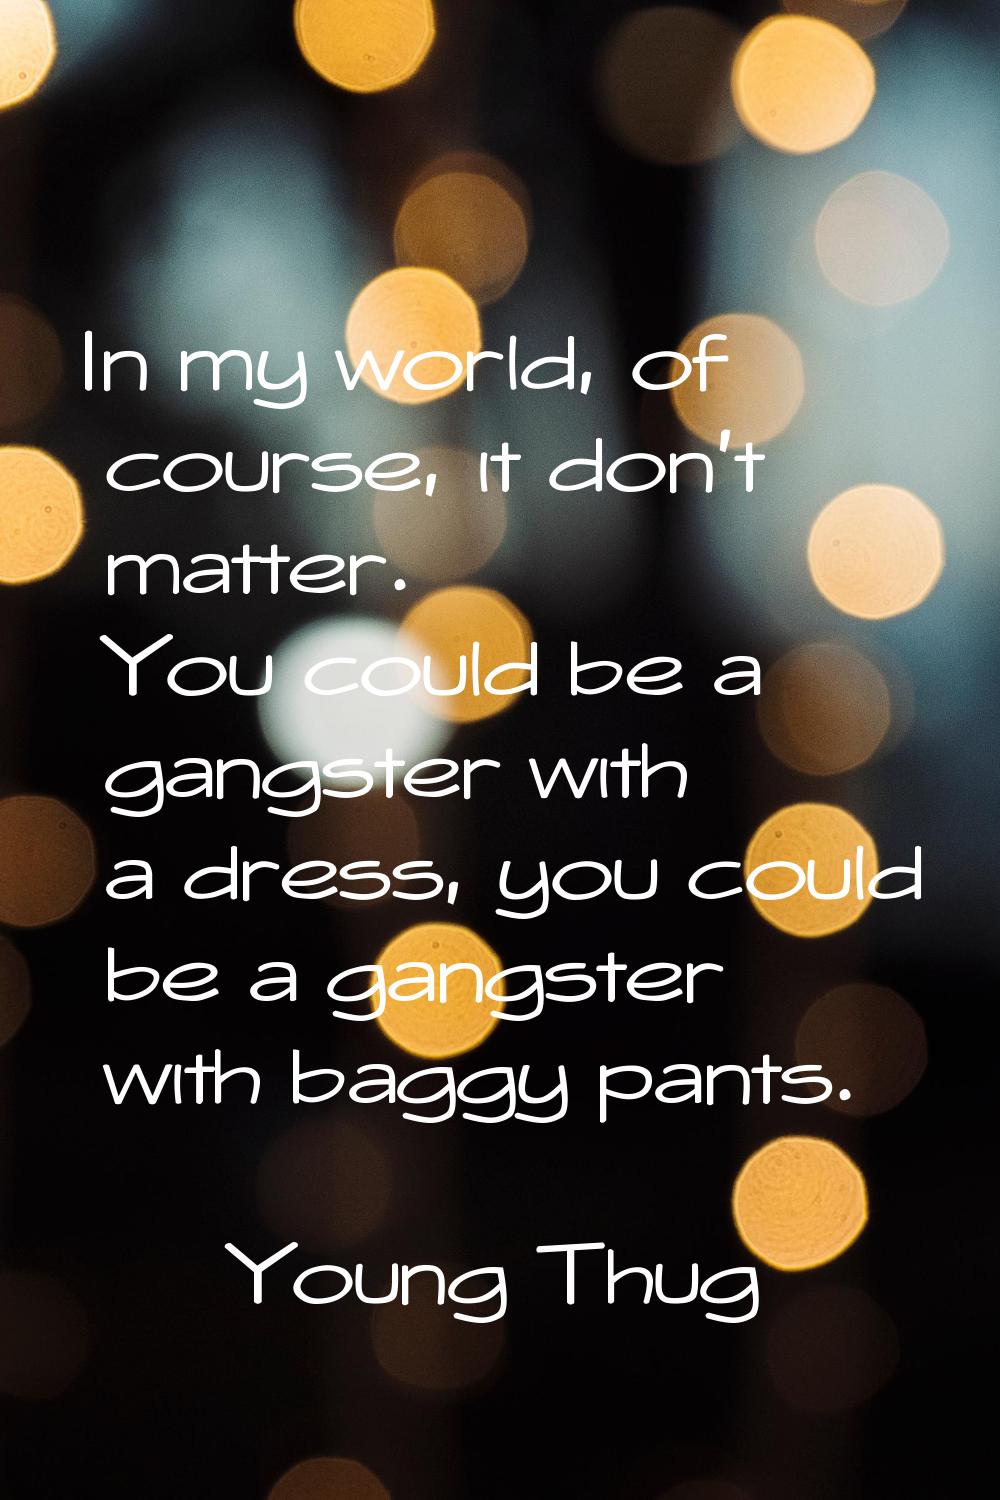 In my world, of course, it don't matter. You could be a gangster with a dress, you could be a gangs